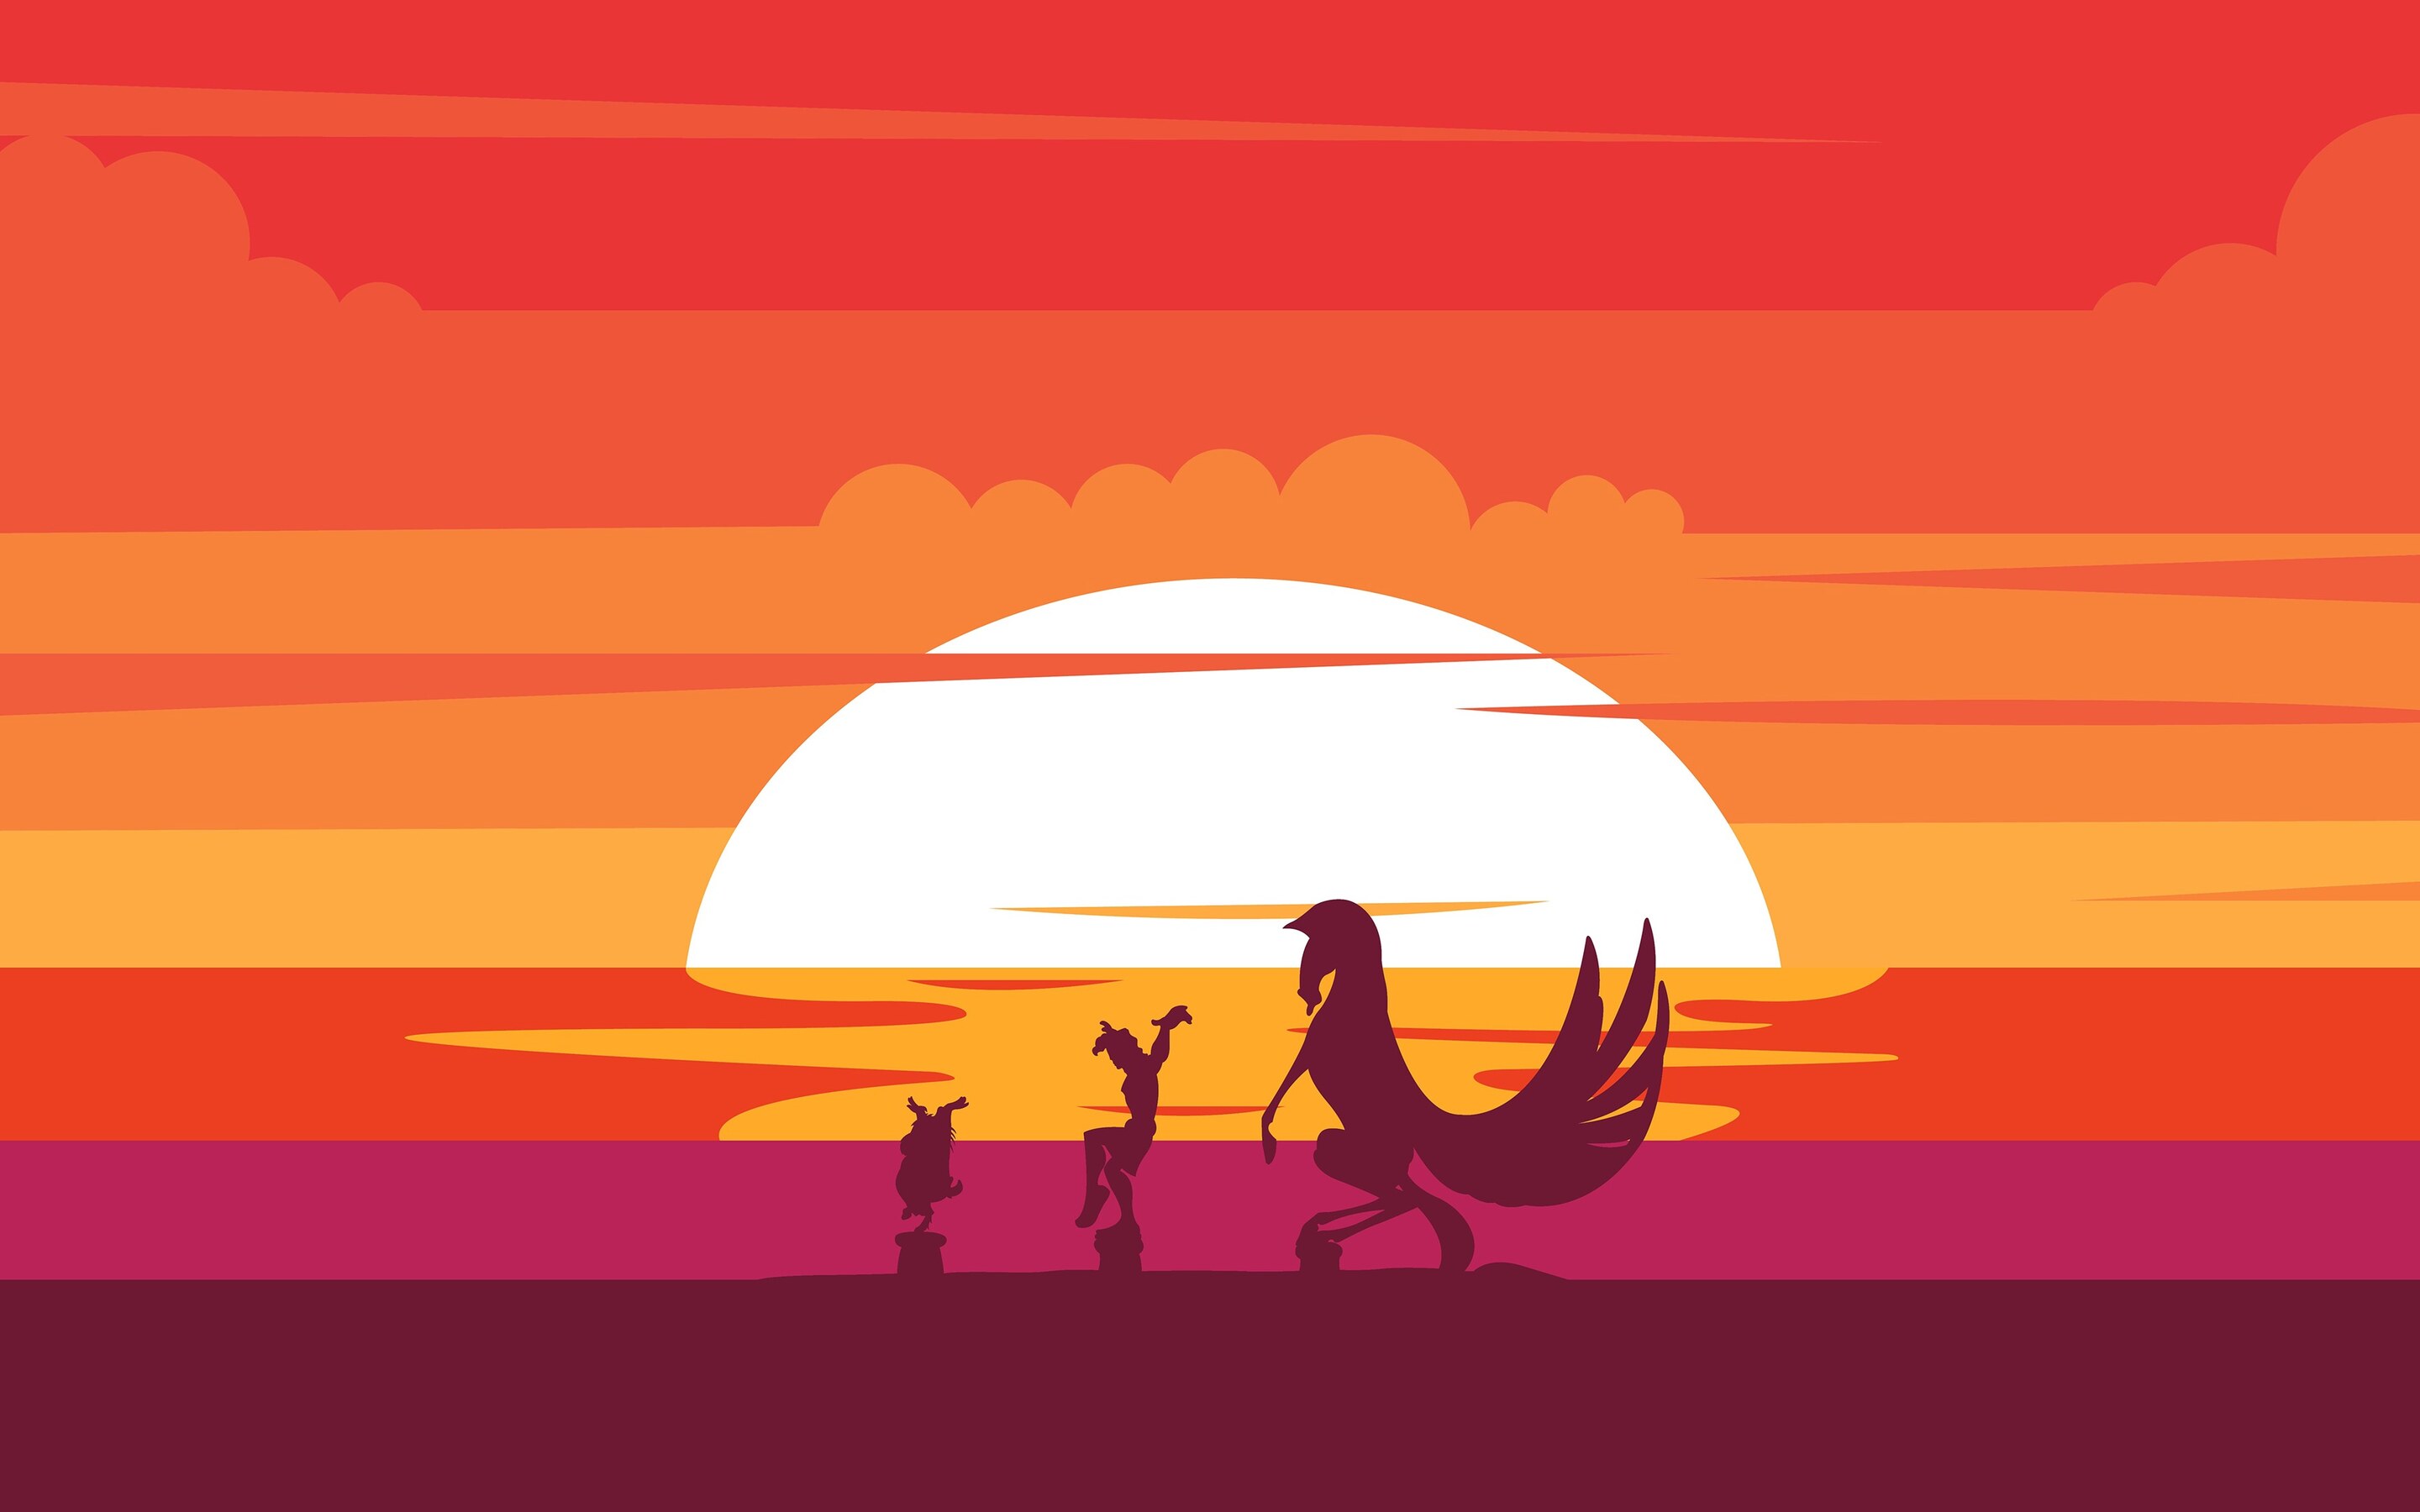 A family of three birds walking on the beach during sunset - Disney